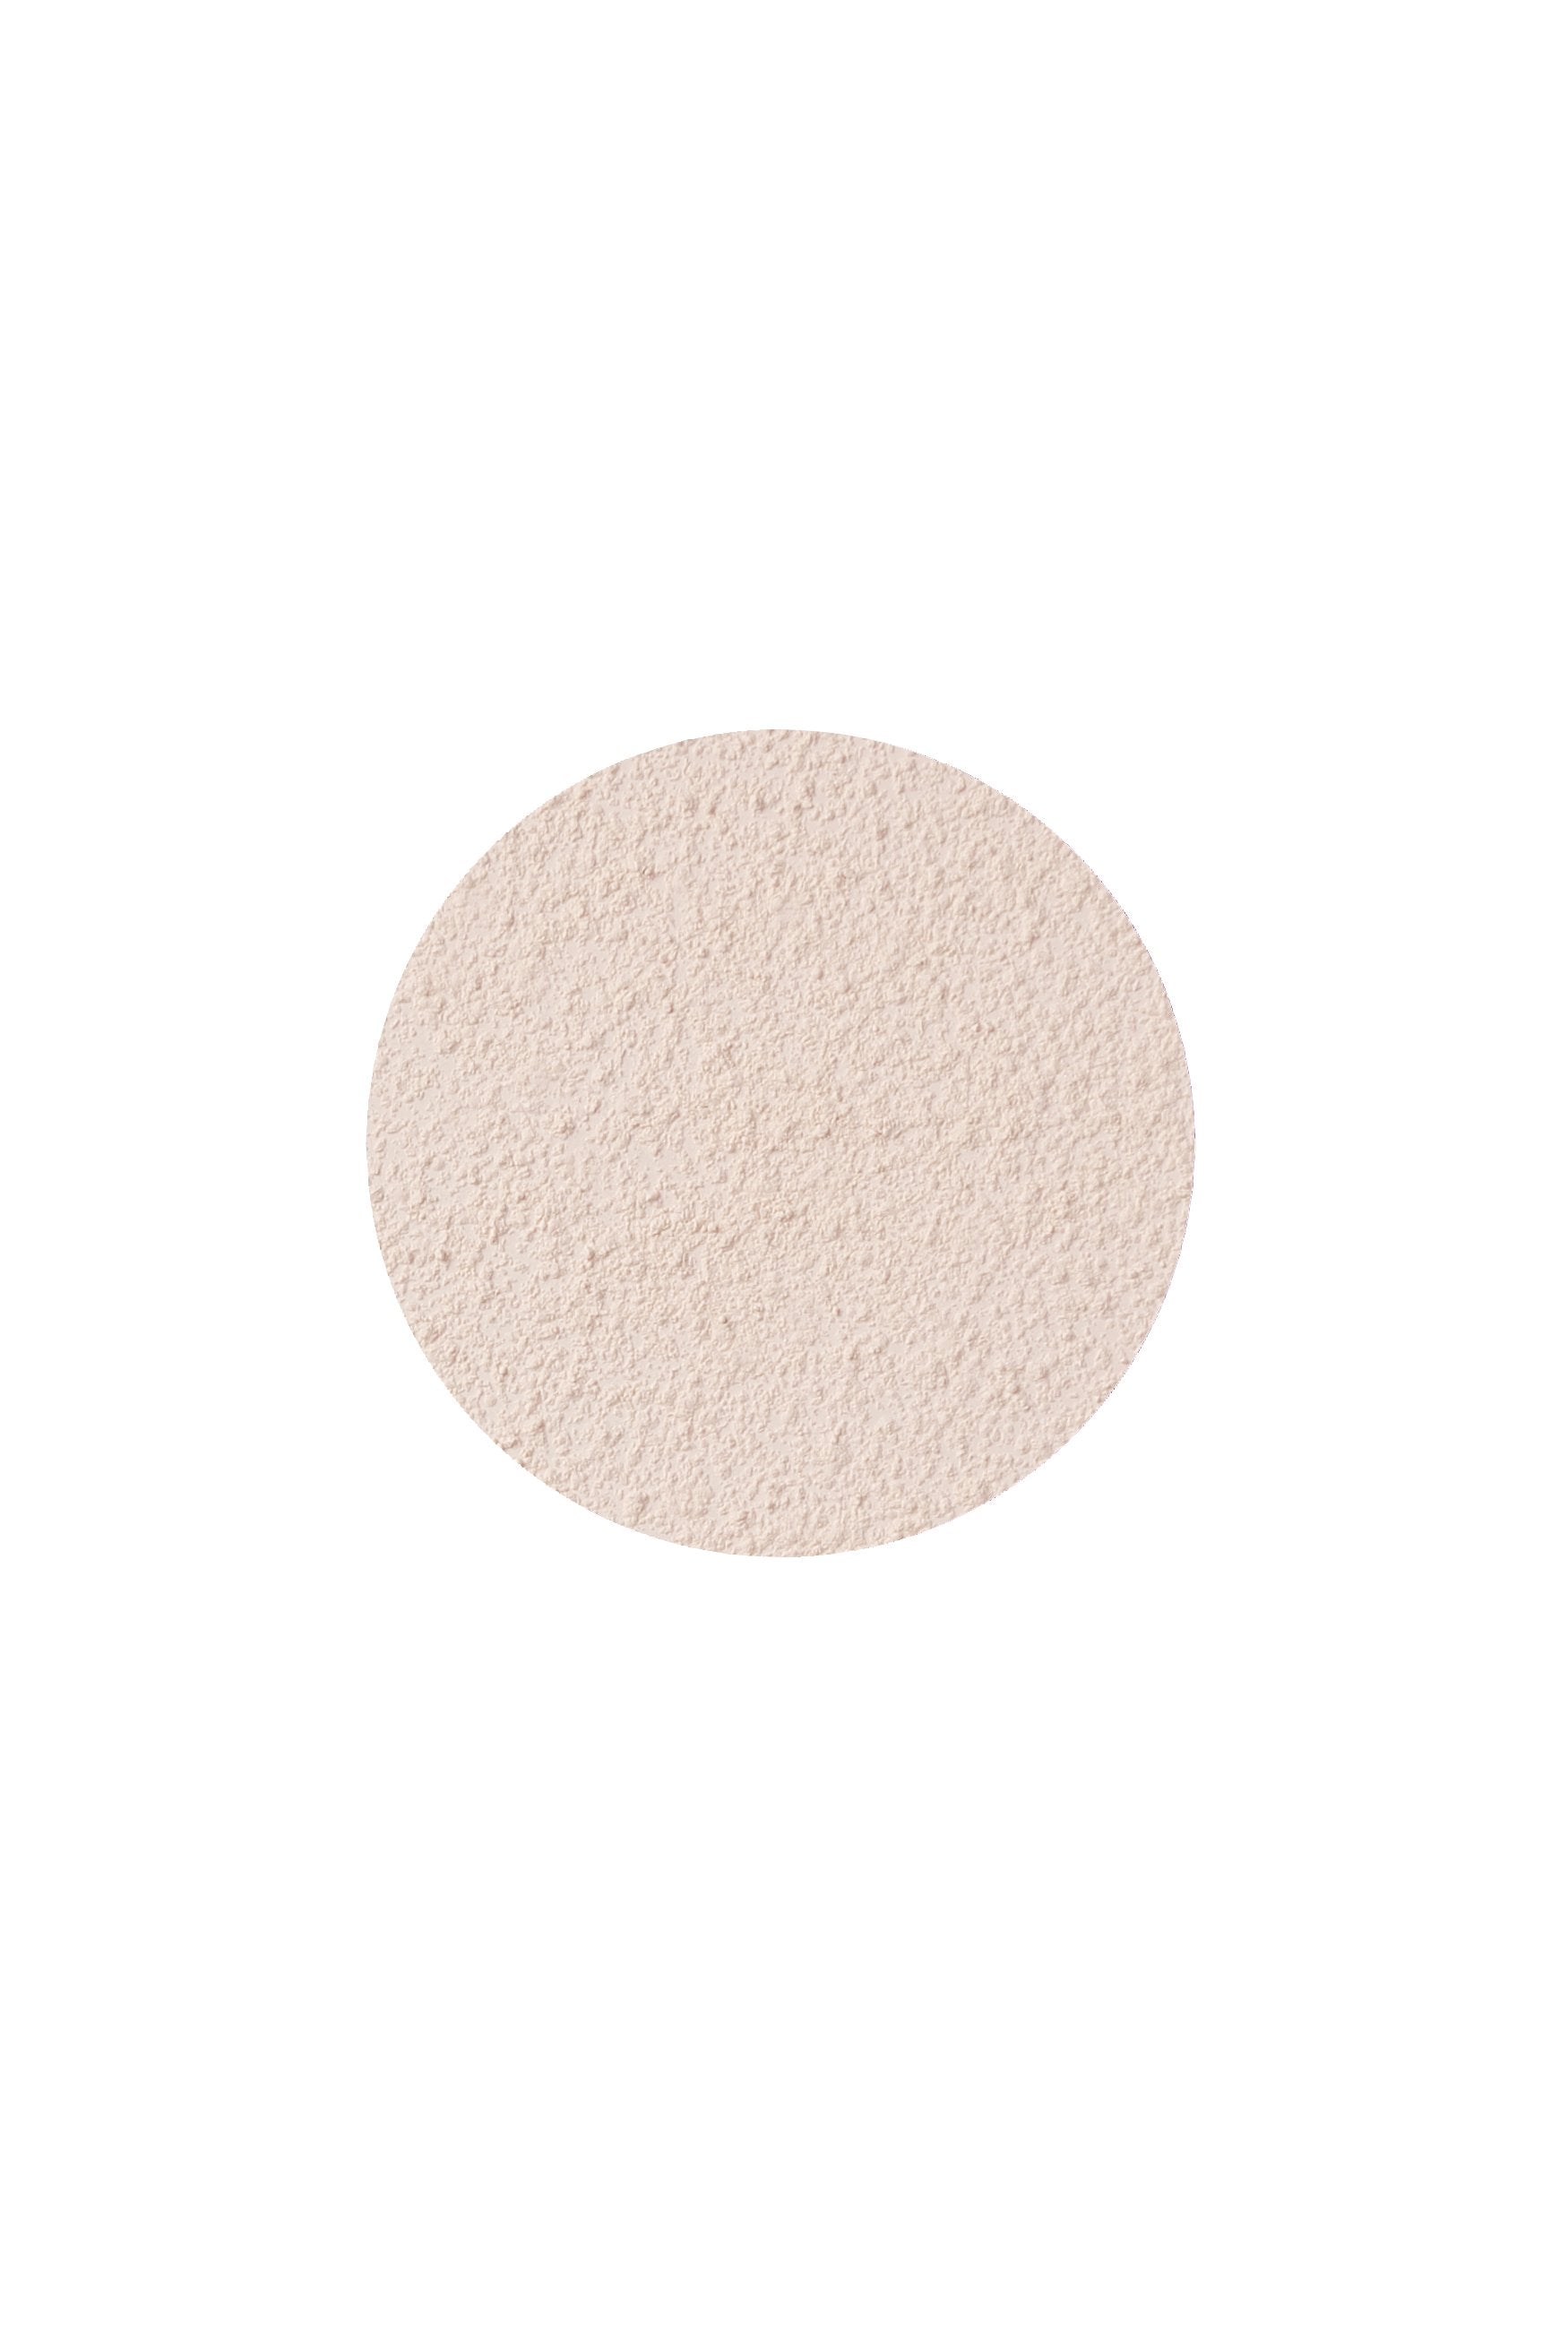 Loose Powder (Large Refill Only) Non Pearl Makes skin tone brighter by eliminating any dullness